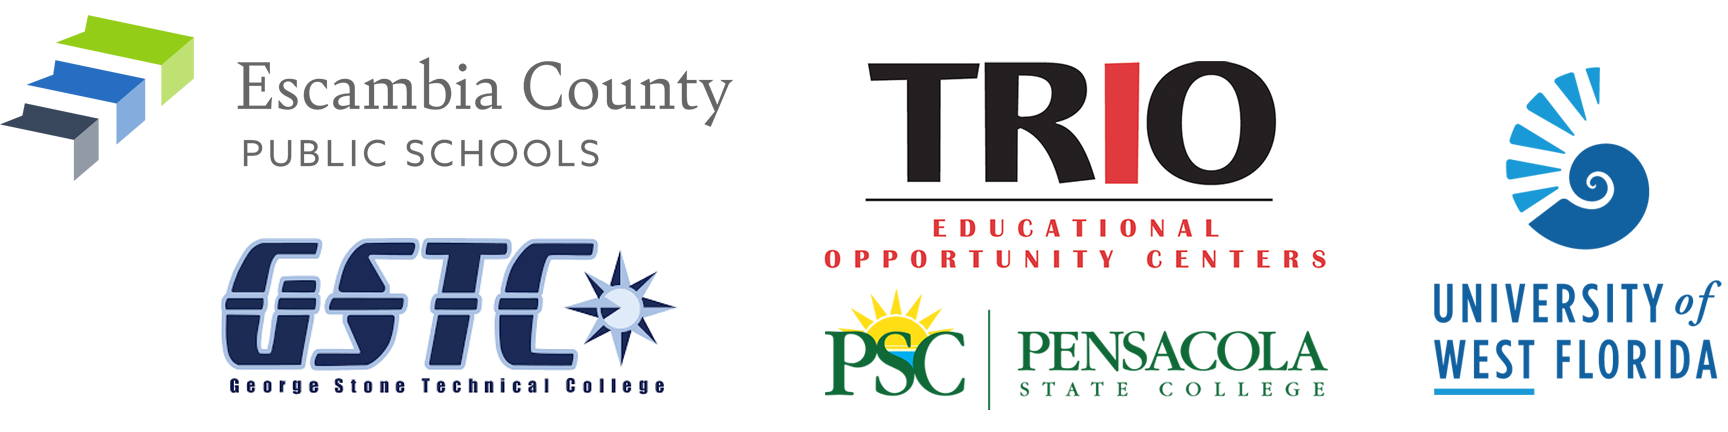 Logos for Escambia County Public School District, George Stone Technical College, Trio Educational Opportunity Centers at Pensacola State College, University of West Florida